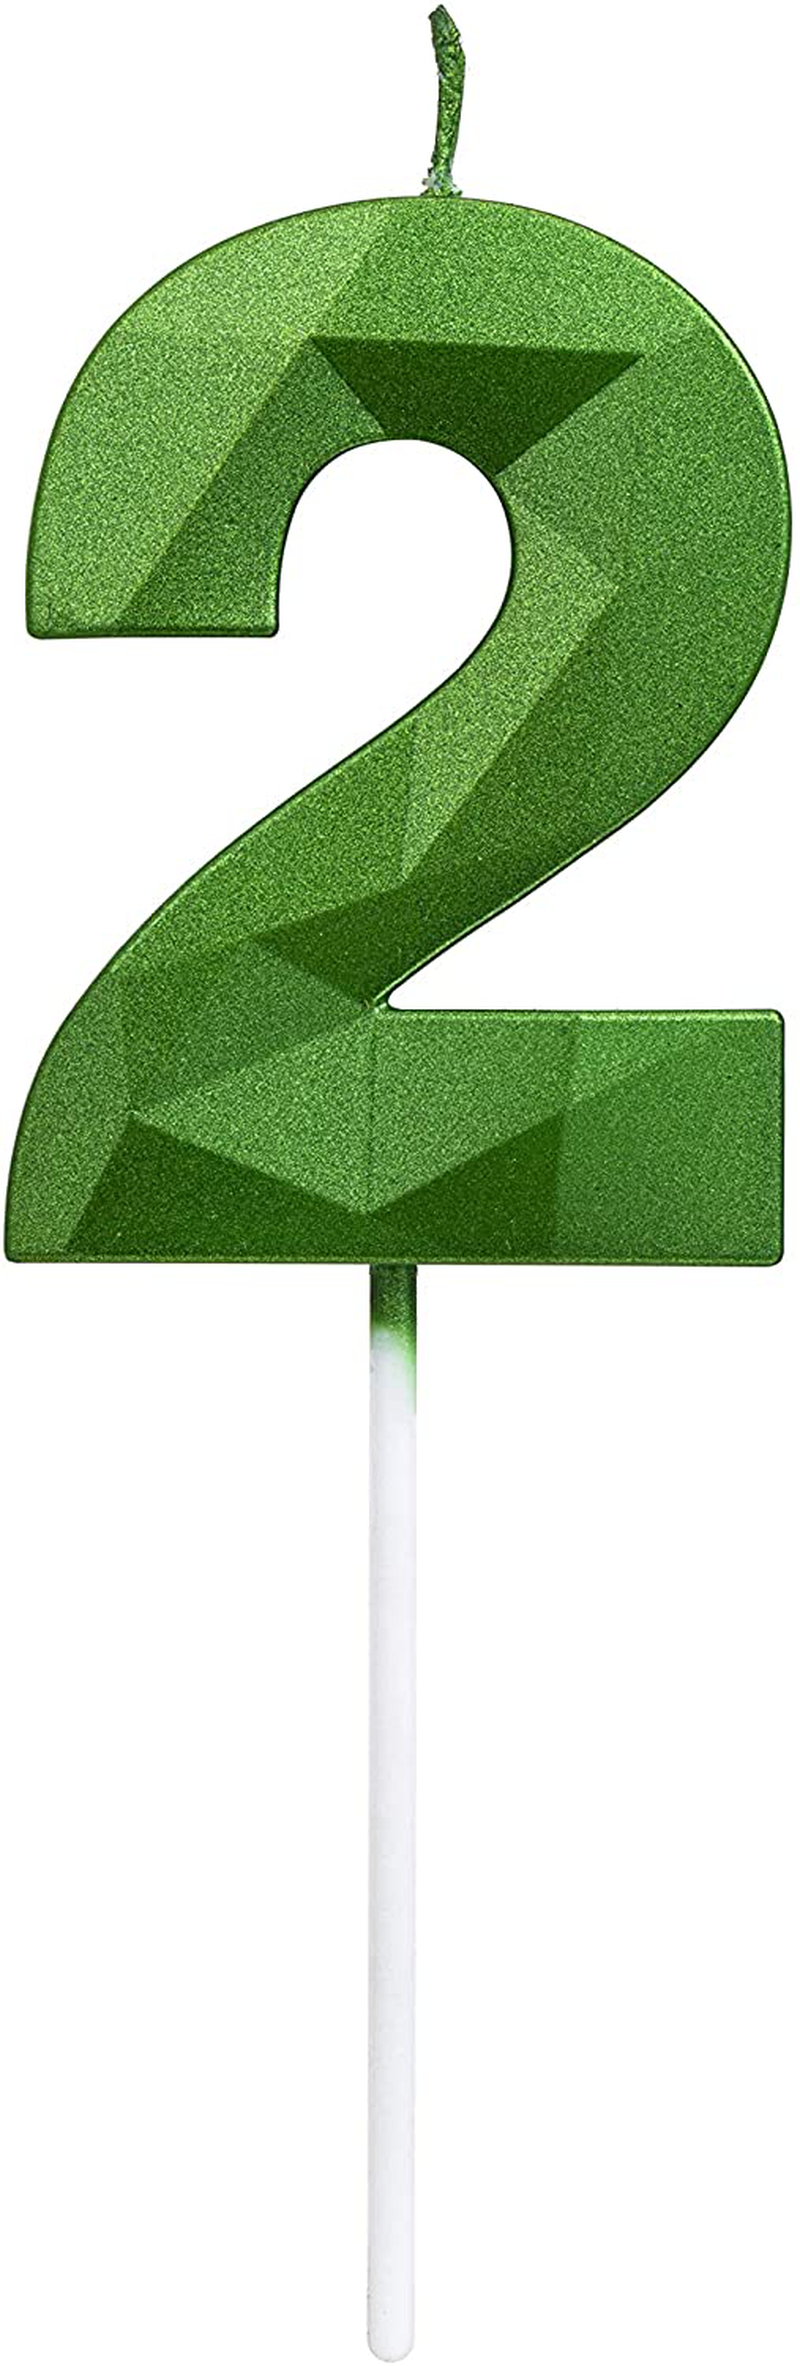 Green Happy Birthday Cake Candles,Wedding Cake Number Candles,3D Design Cake Topper Decoration for Party Kids Adults (Green Number 6) Home & Garden > Decor > Seasonal & Holiday Decorations& Garden > Decor > Seasonal & Holiday Decorations MEIMEI Green number 2 